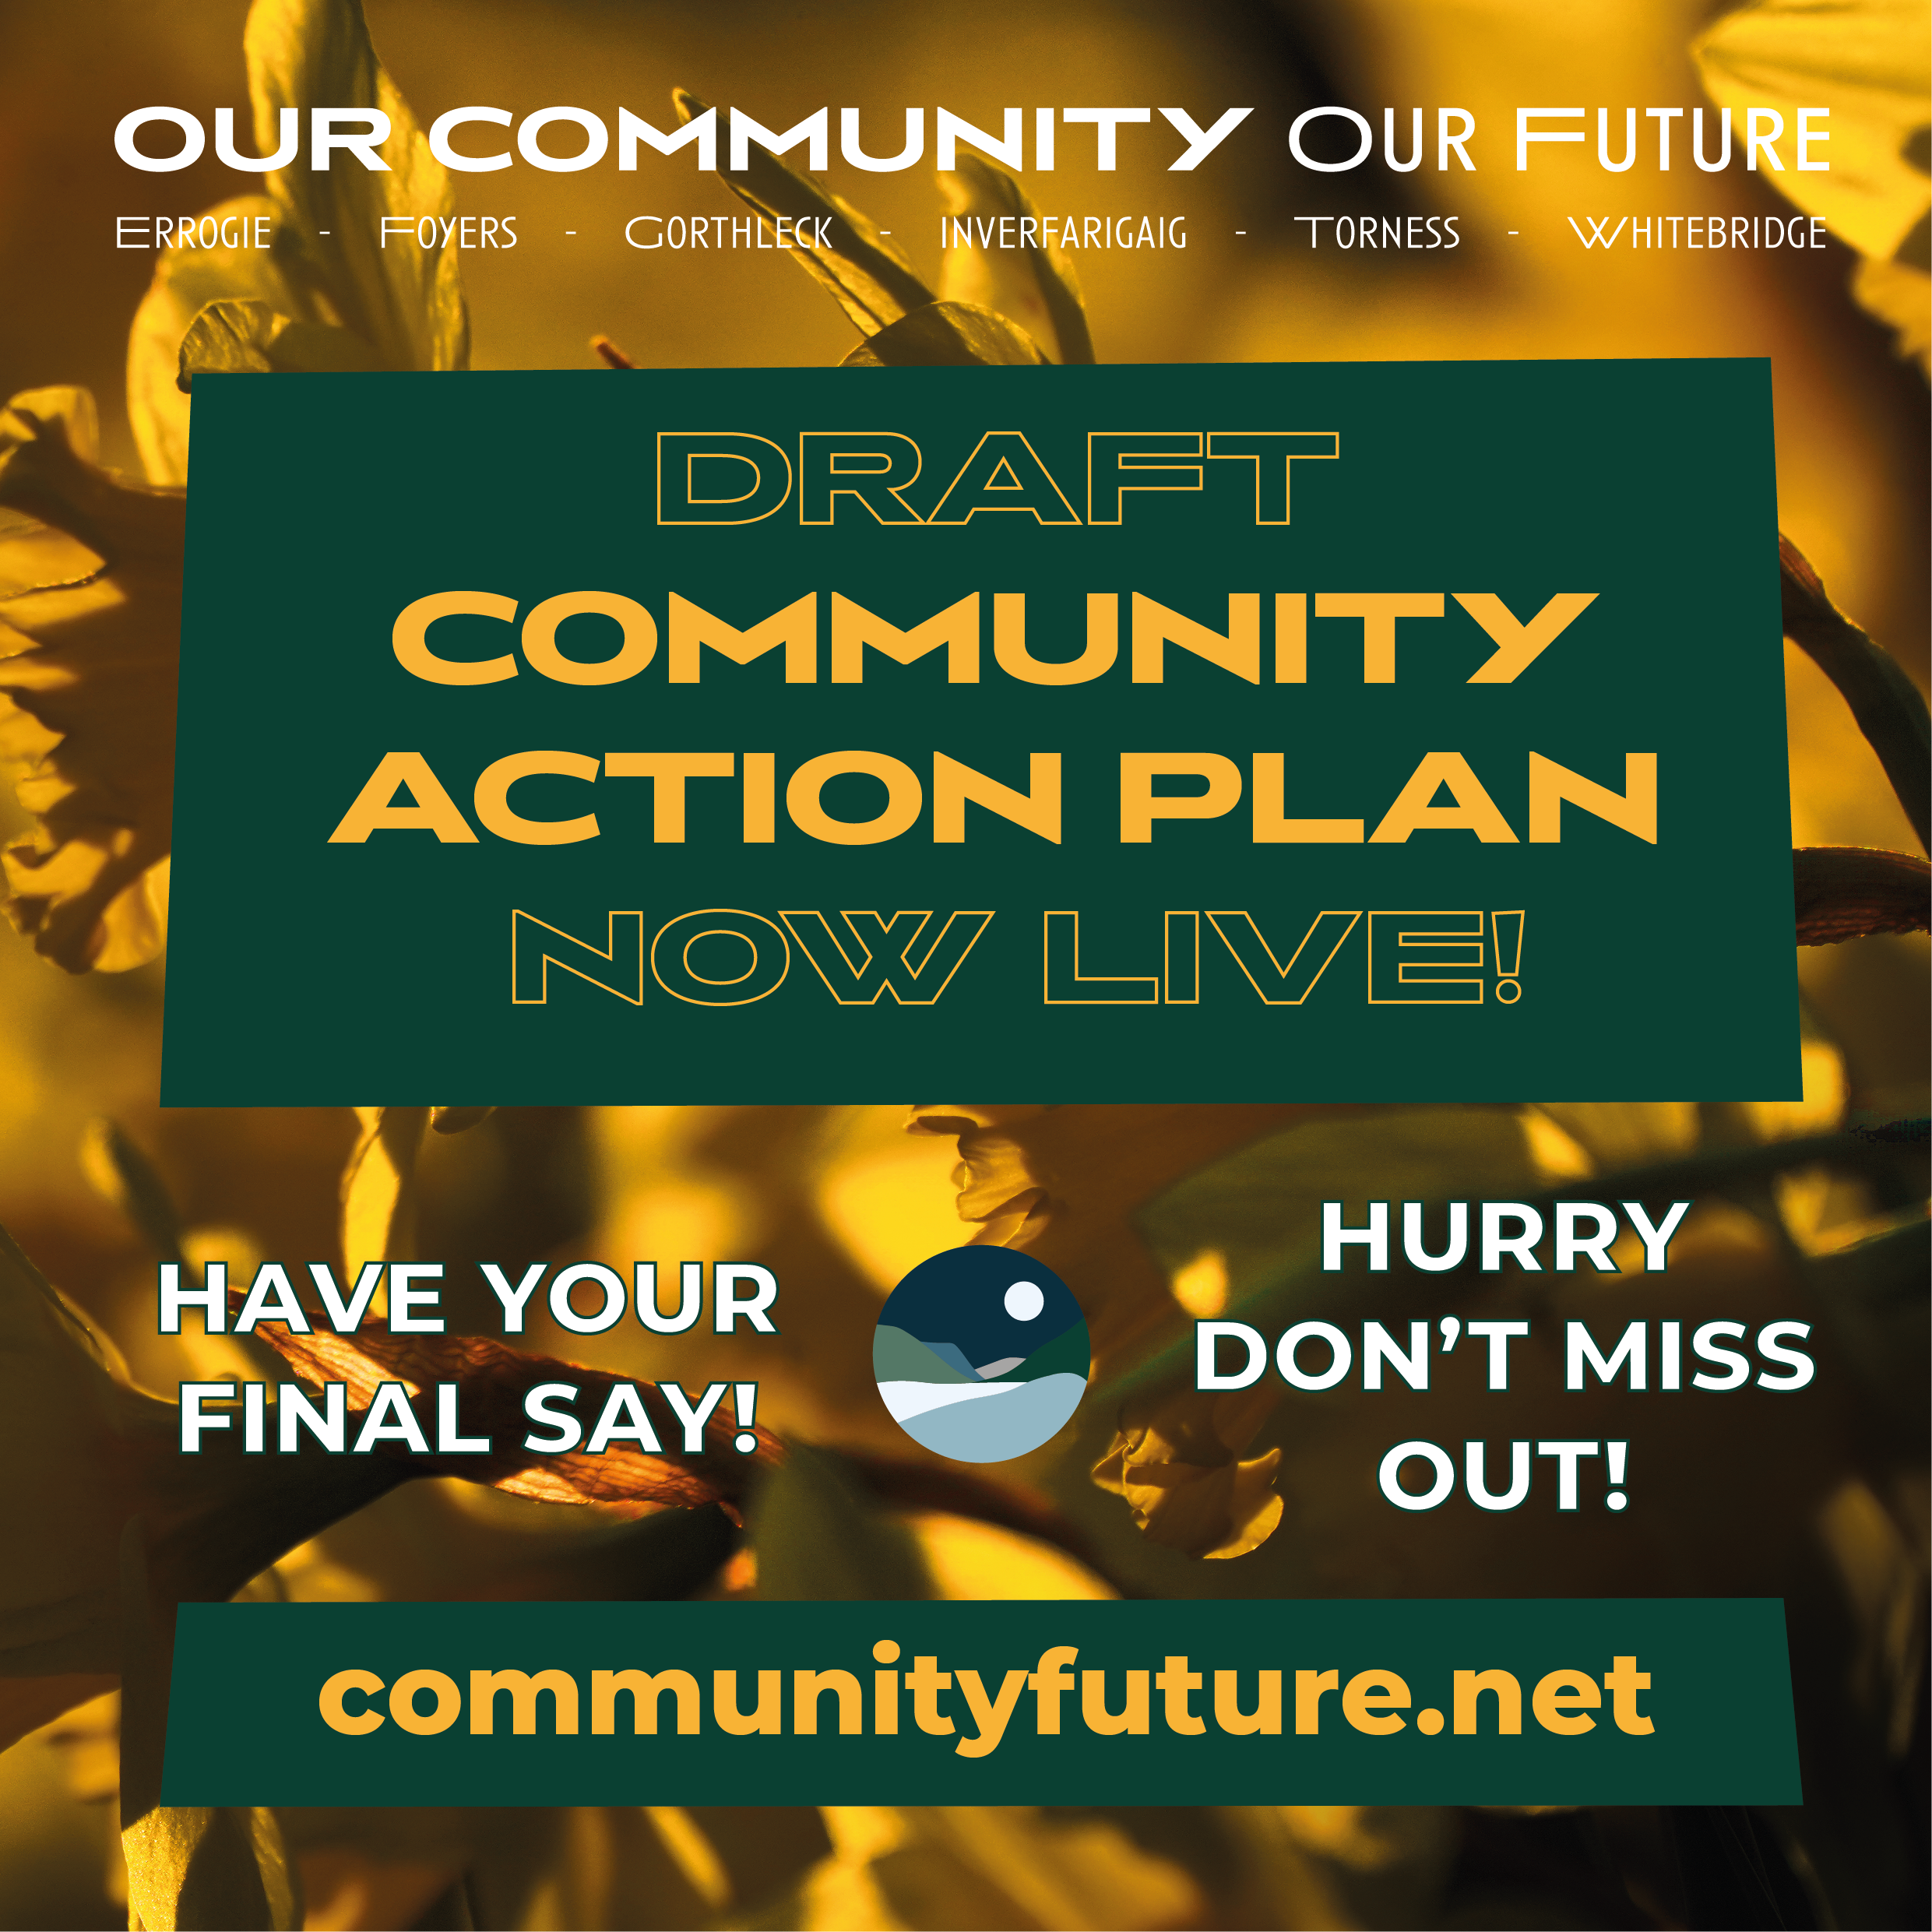 Draft community action plan now live - what do you reckon?